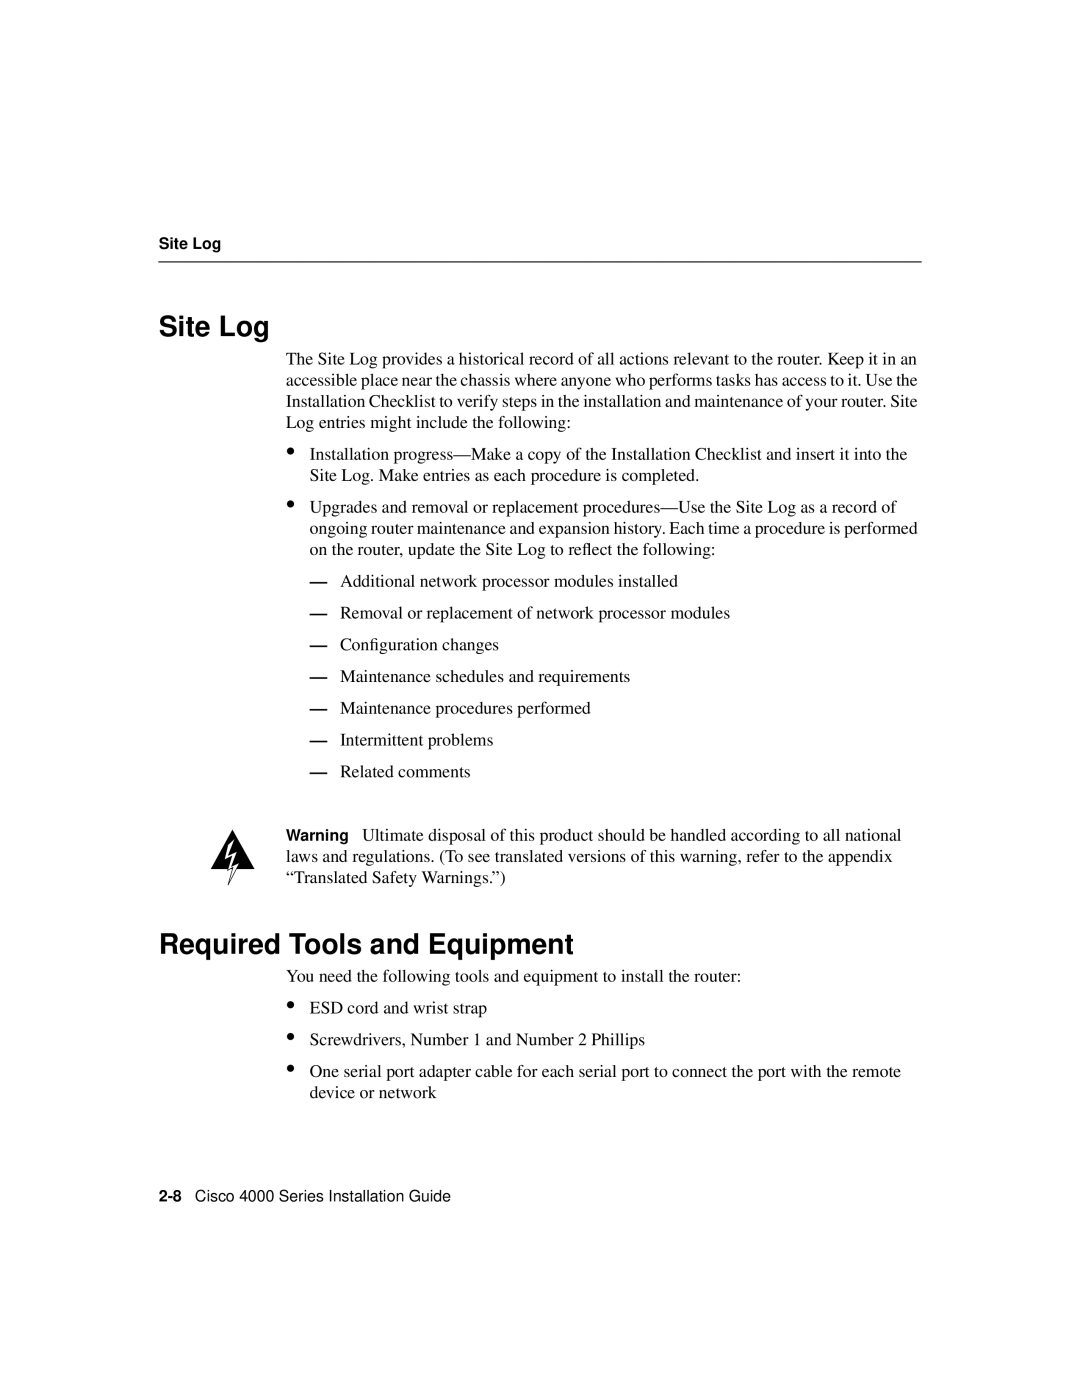 Cisco Systems 4000 appendix Site Log, Required Tools and Equipment 